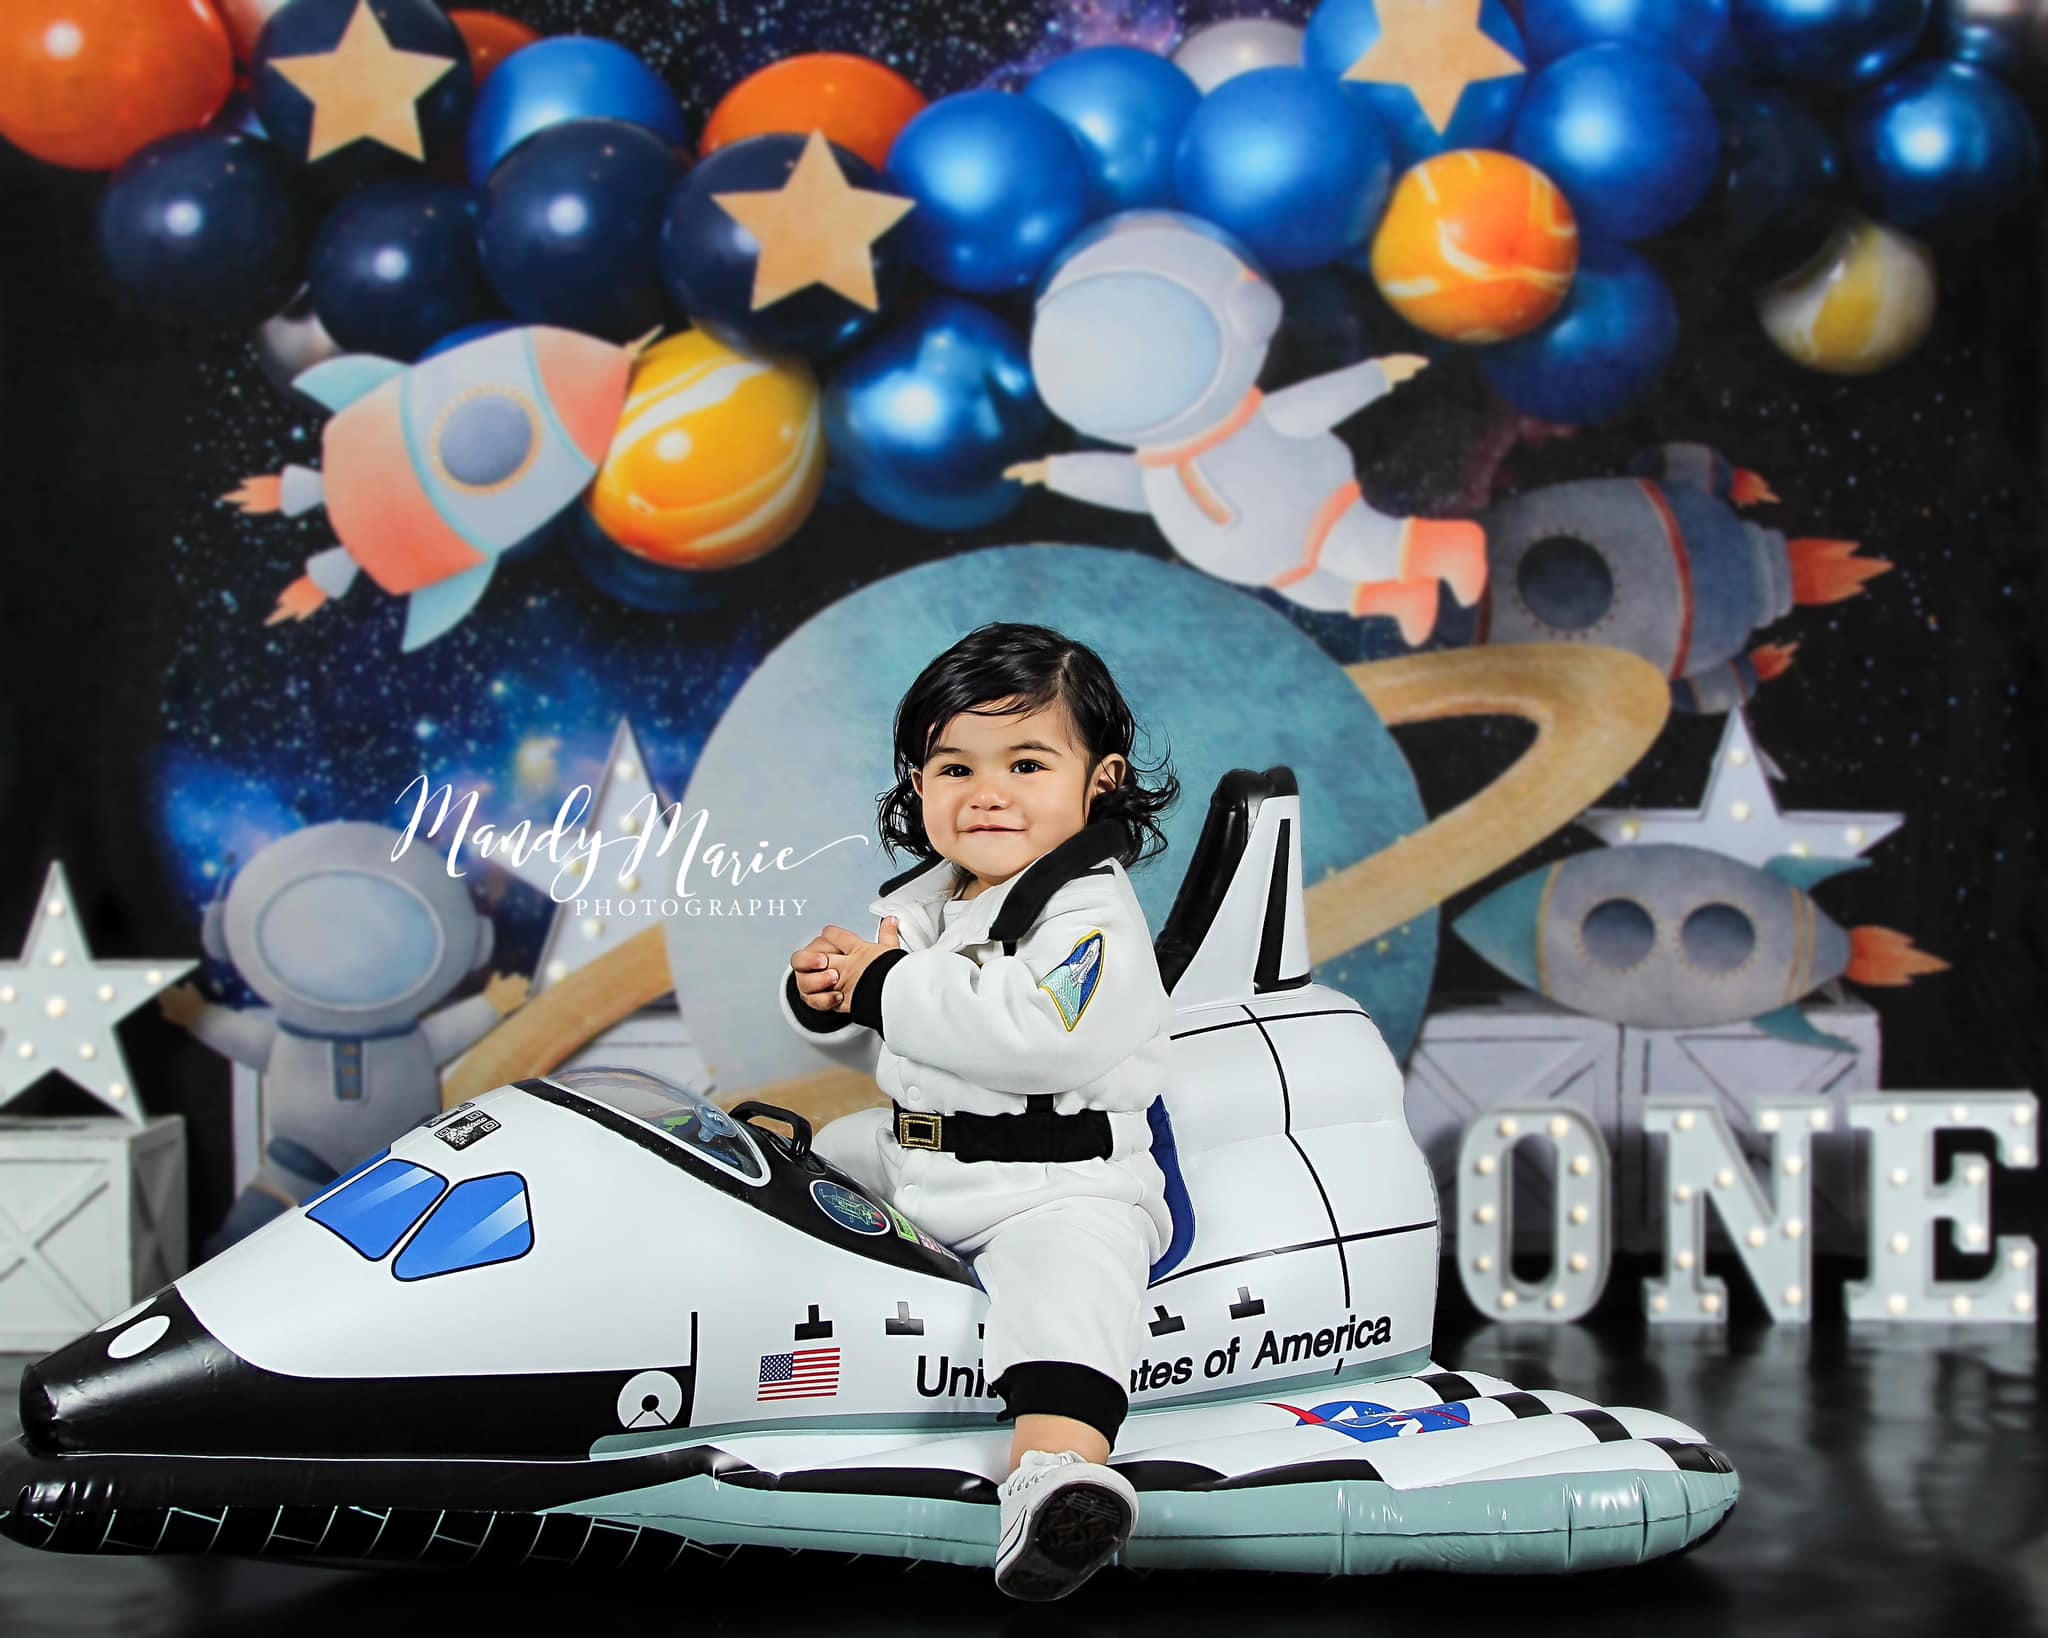 Kate Birthday Outer Space Balloon Backdrop Designed by Caitlin Lynch